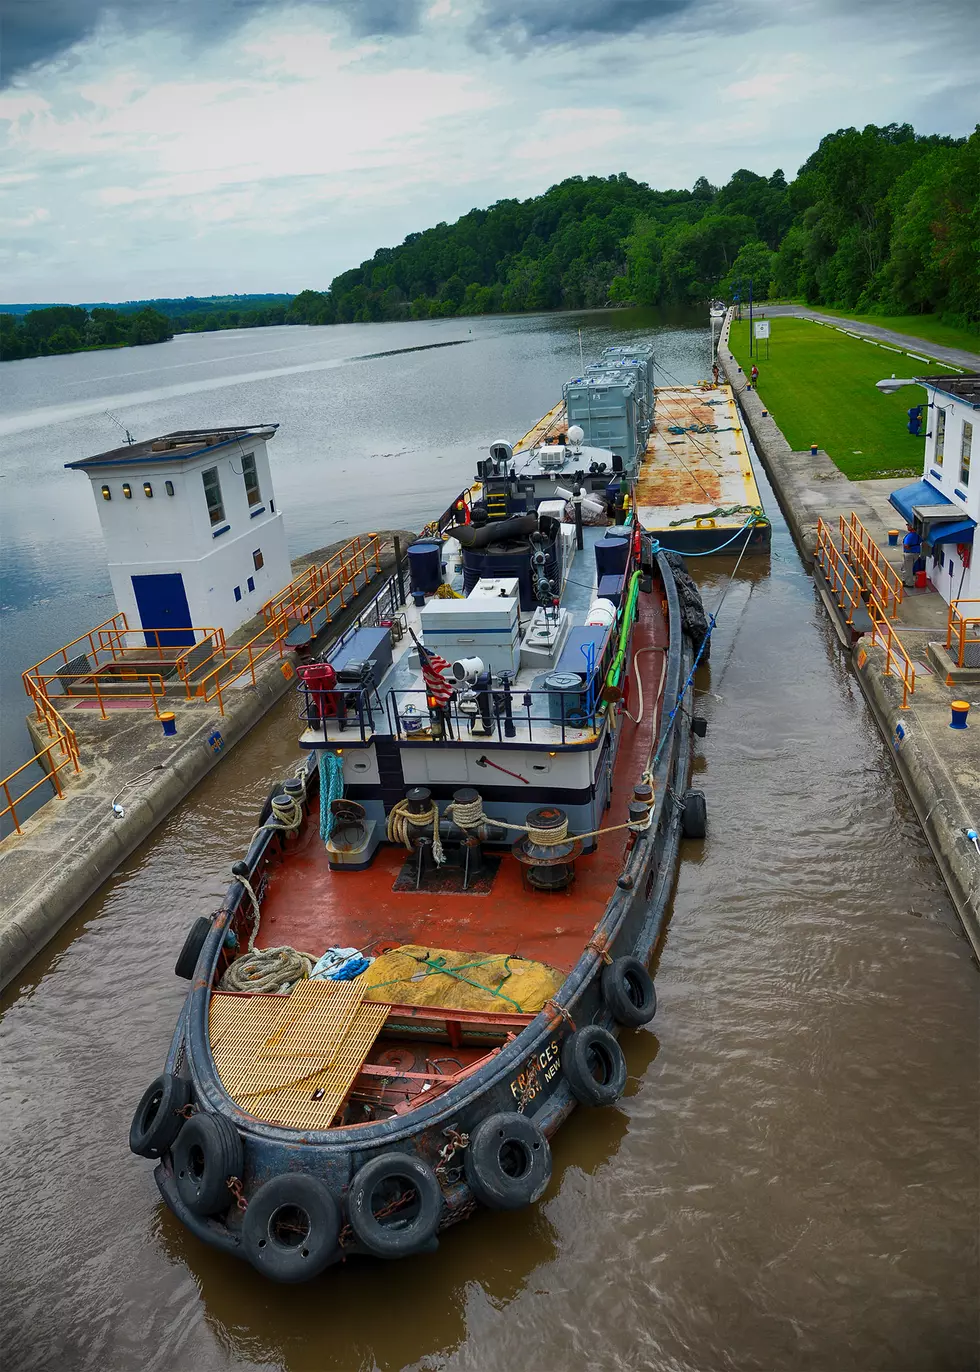 Transformers Travel Through Canals To Massena Hydro Project